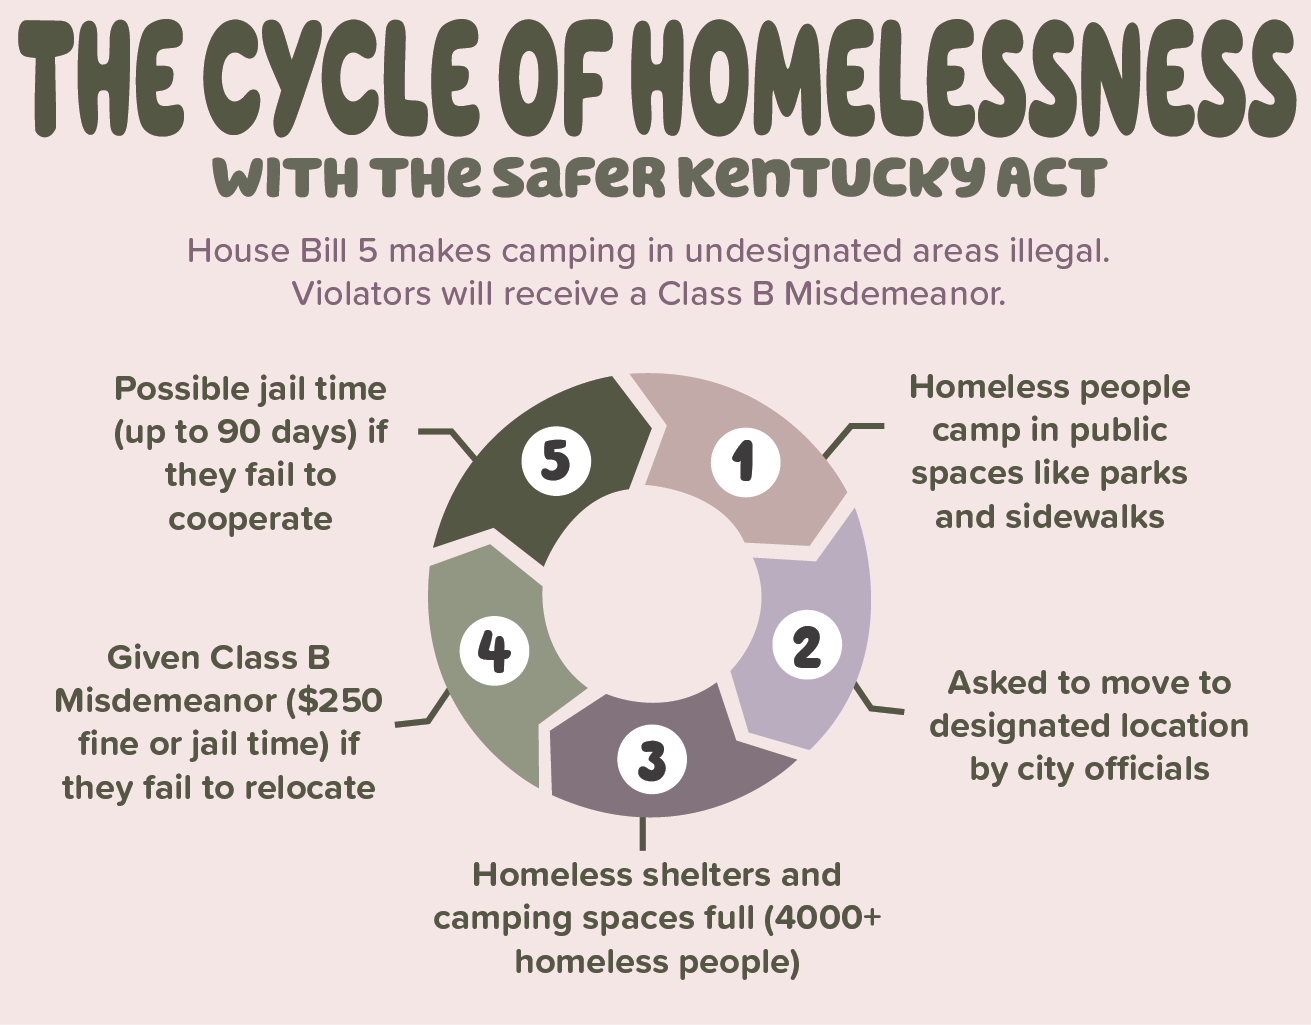 Safer Kentucky Act and Homelessness